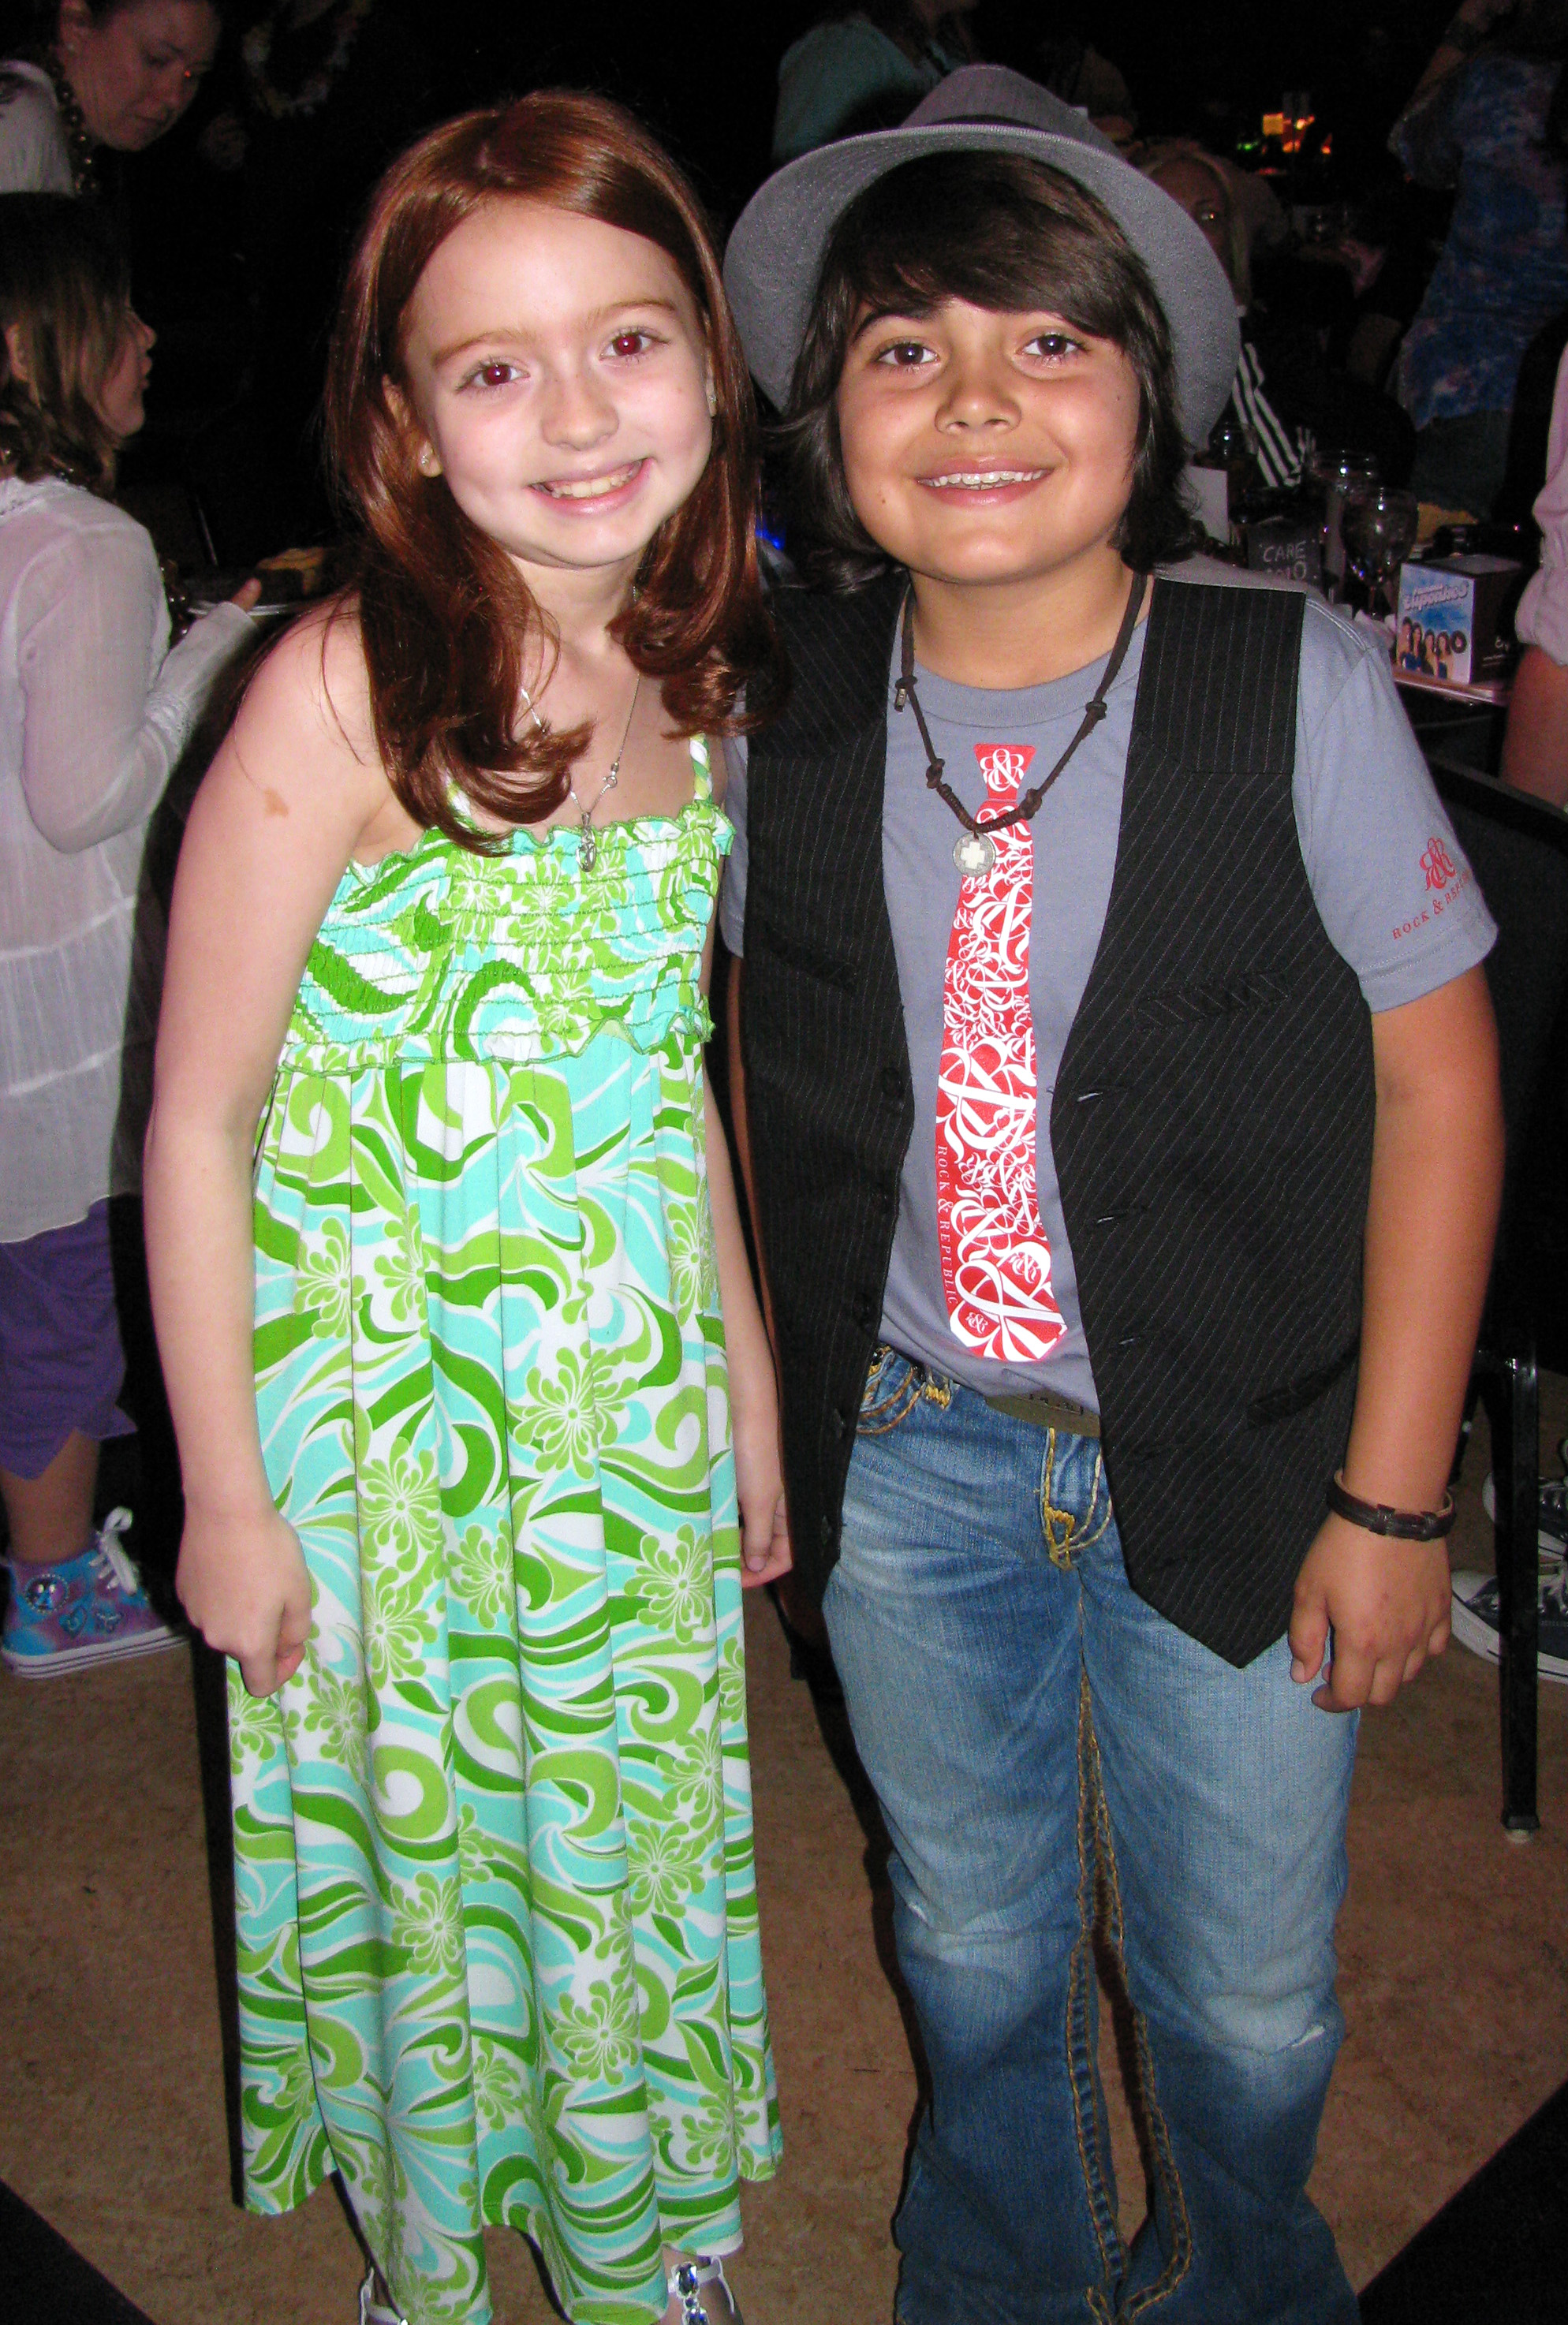 Parker Contreras and Piper Harris at CARE Awards 2010.